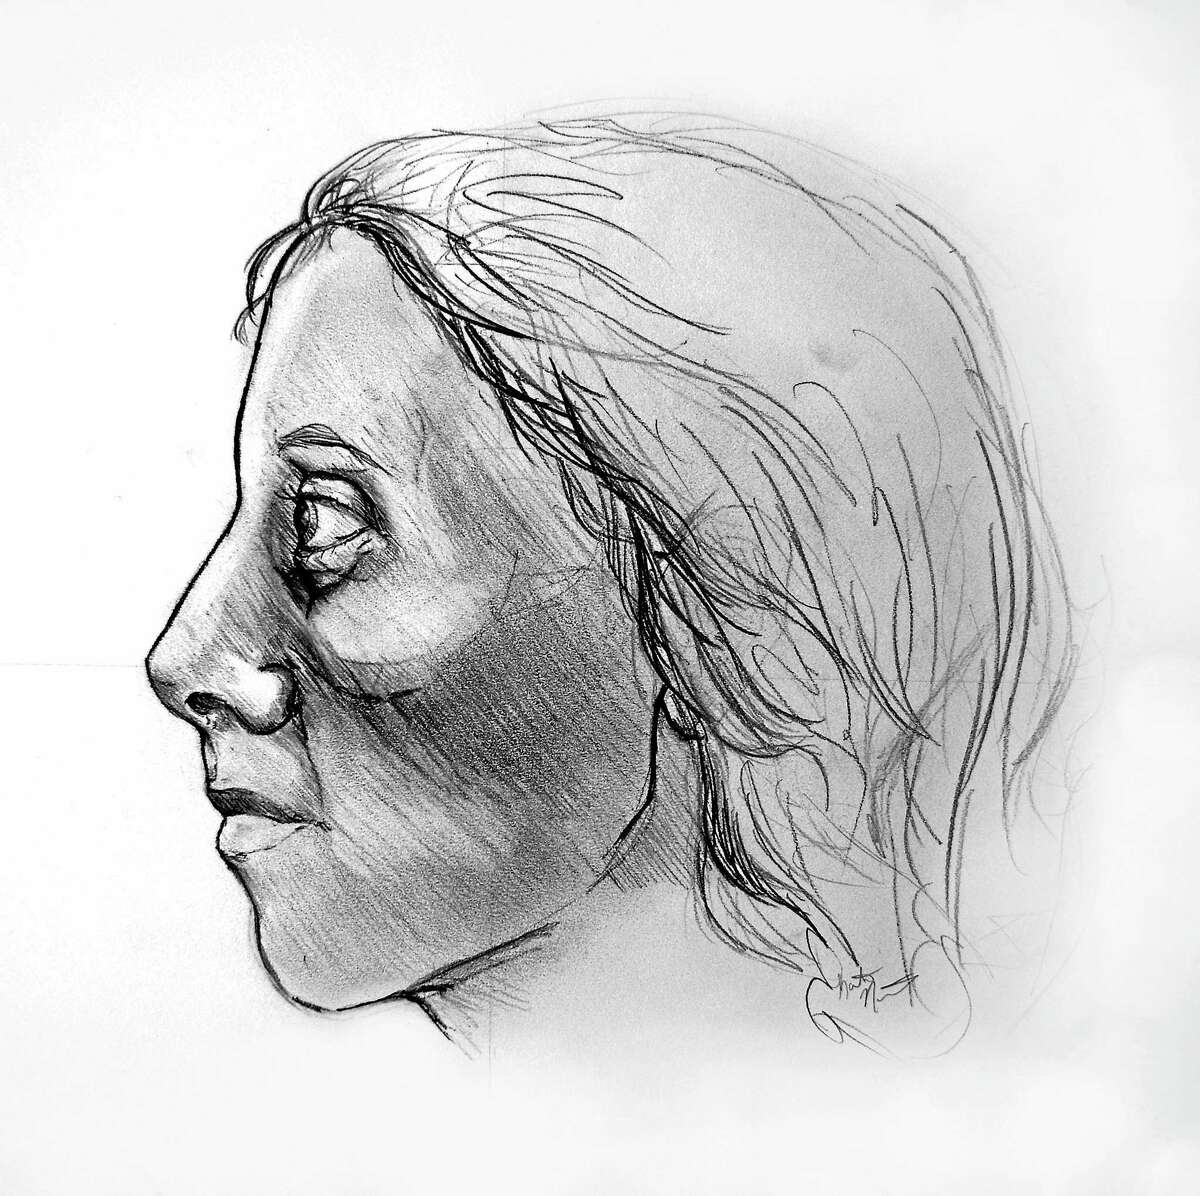 Composite sketch prepared by Quinnipiac University medical student Katelyn Norman was released by police in hopes of identifying remains found in Vernon.